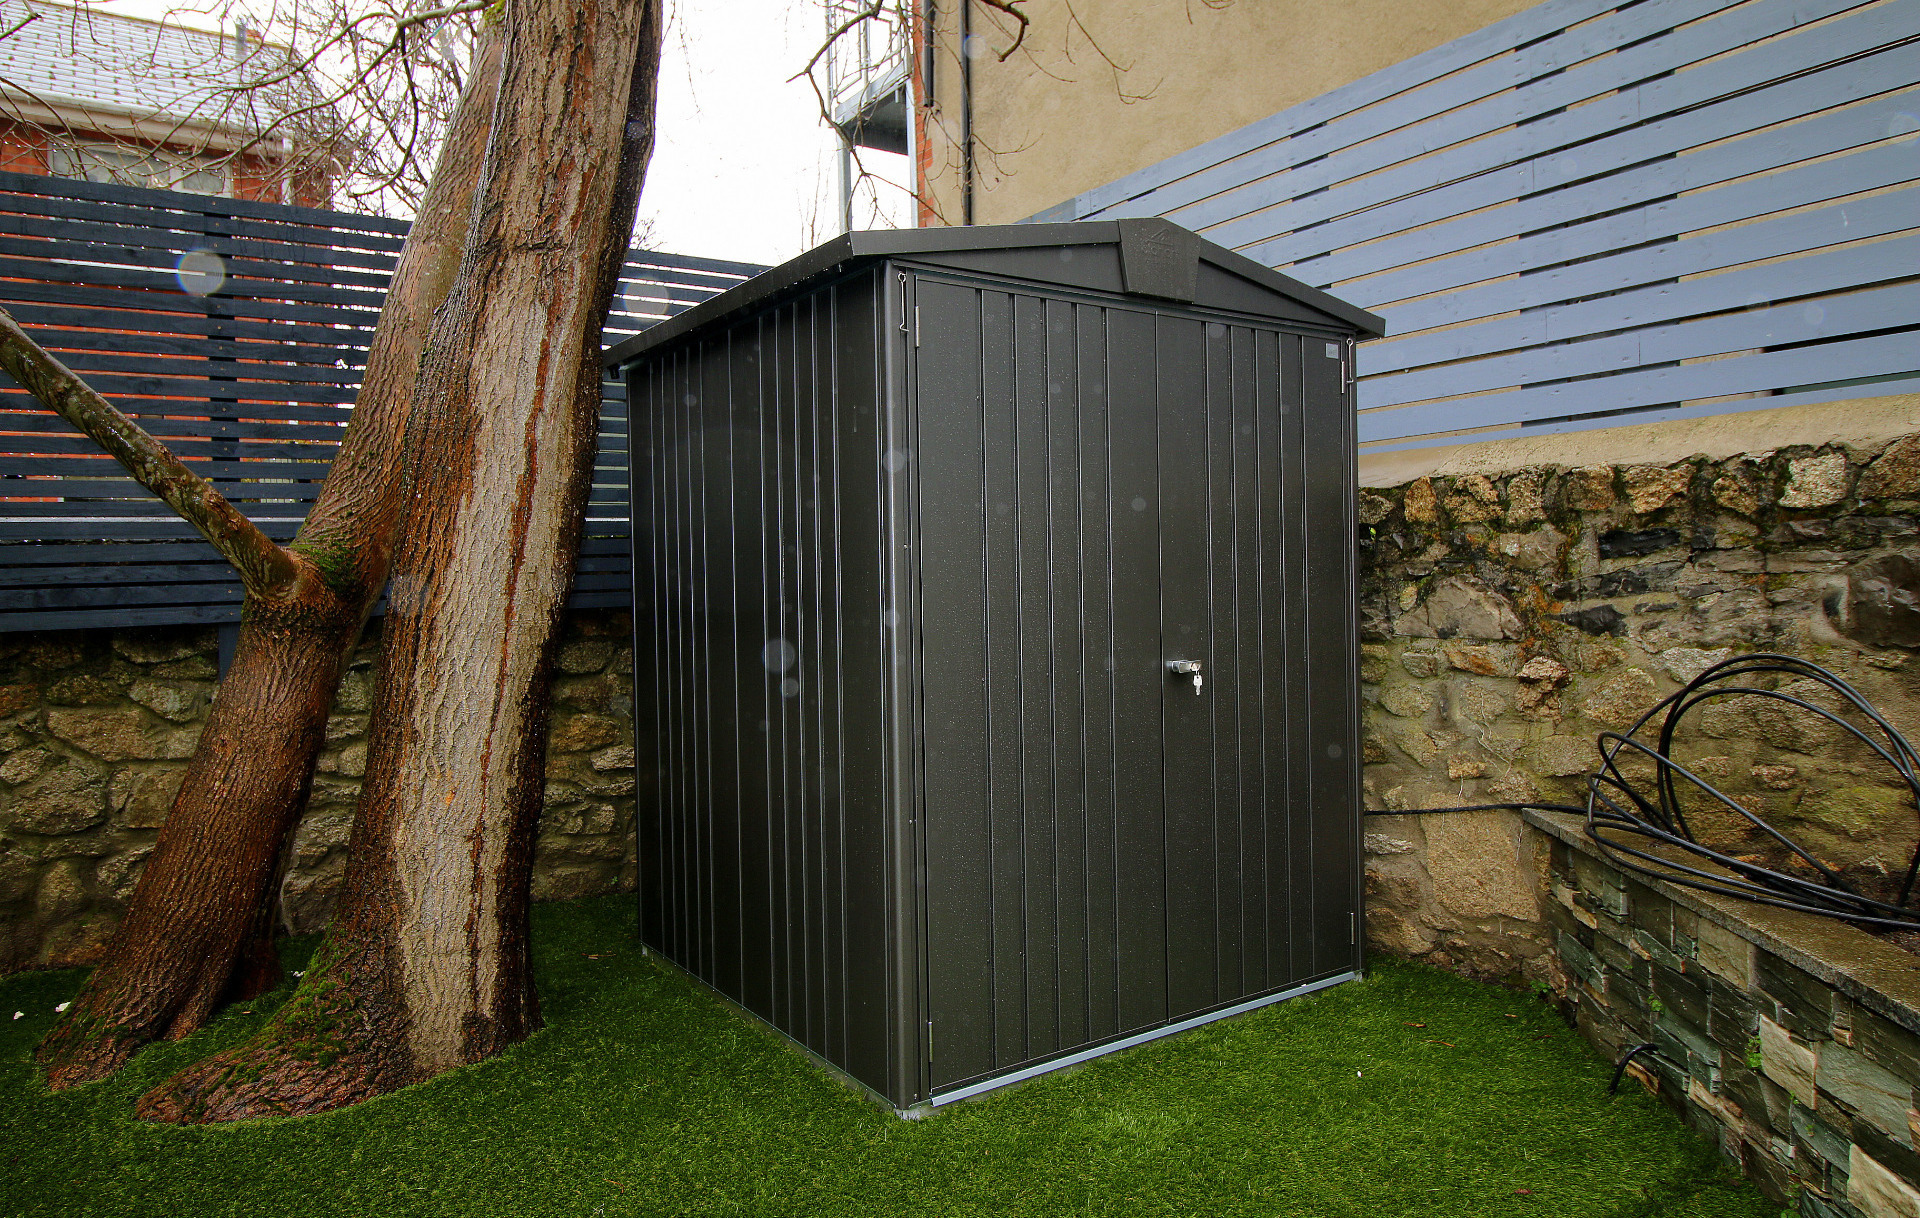 BEST PRICES for Biohort Europa Size 3 Garden Shed, in metallic dark grey, supplied + fitted in Dublin 6 by Owen Chubb Landscapers